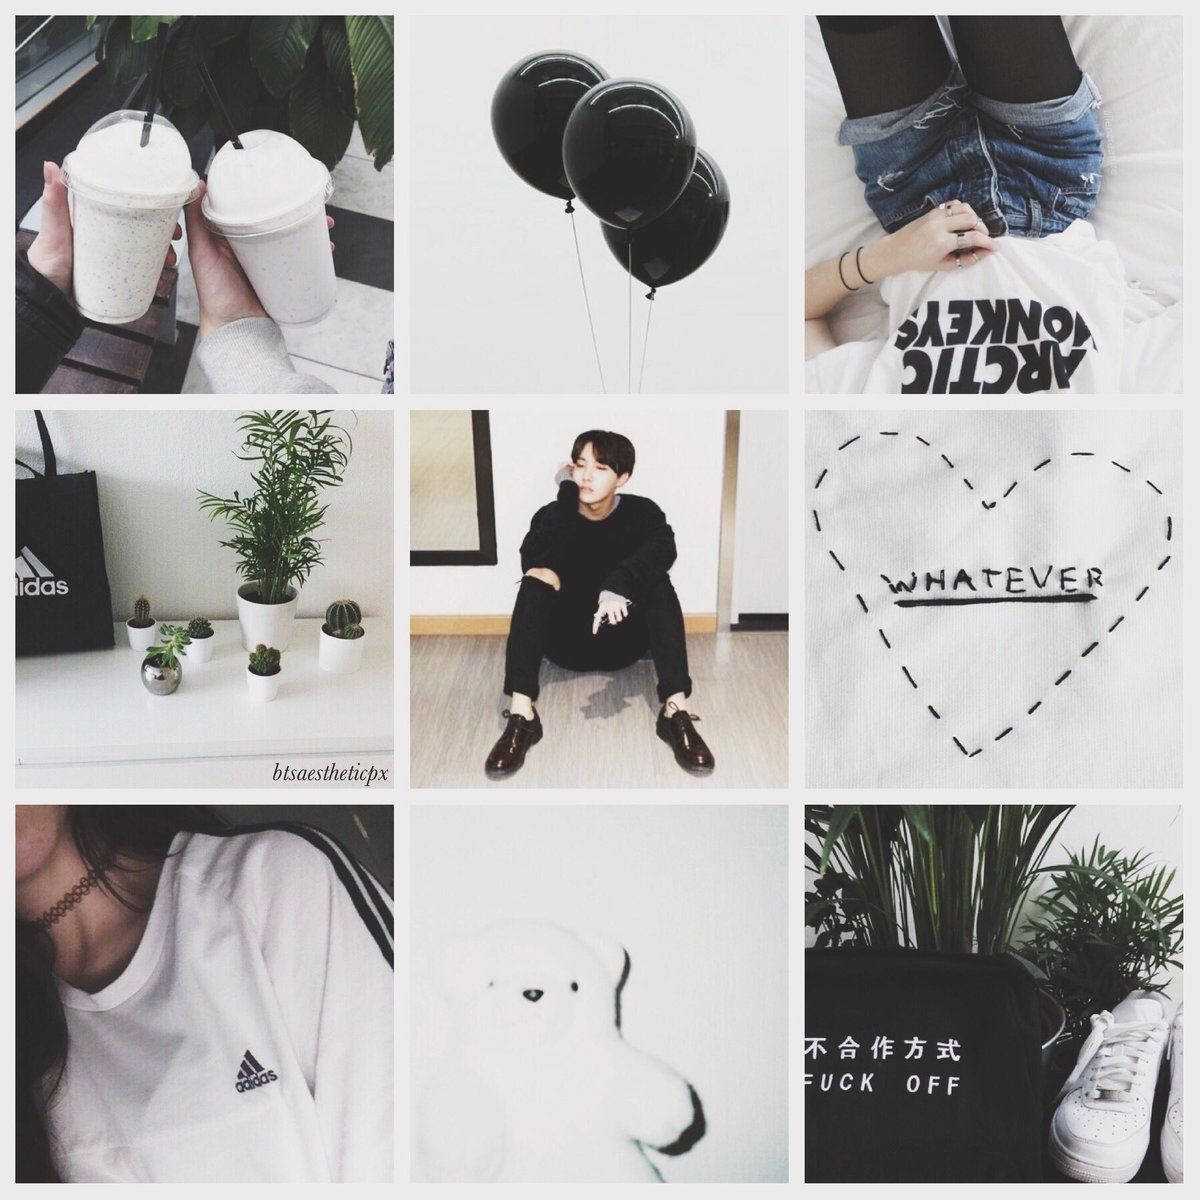 Bts Aesthetic Date With J-hope